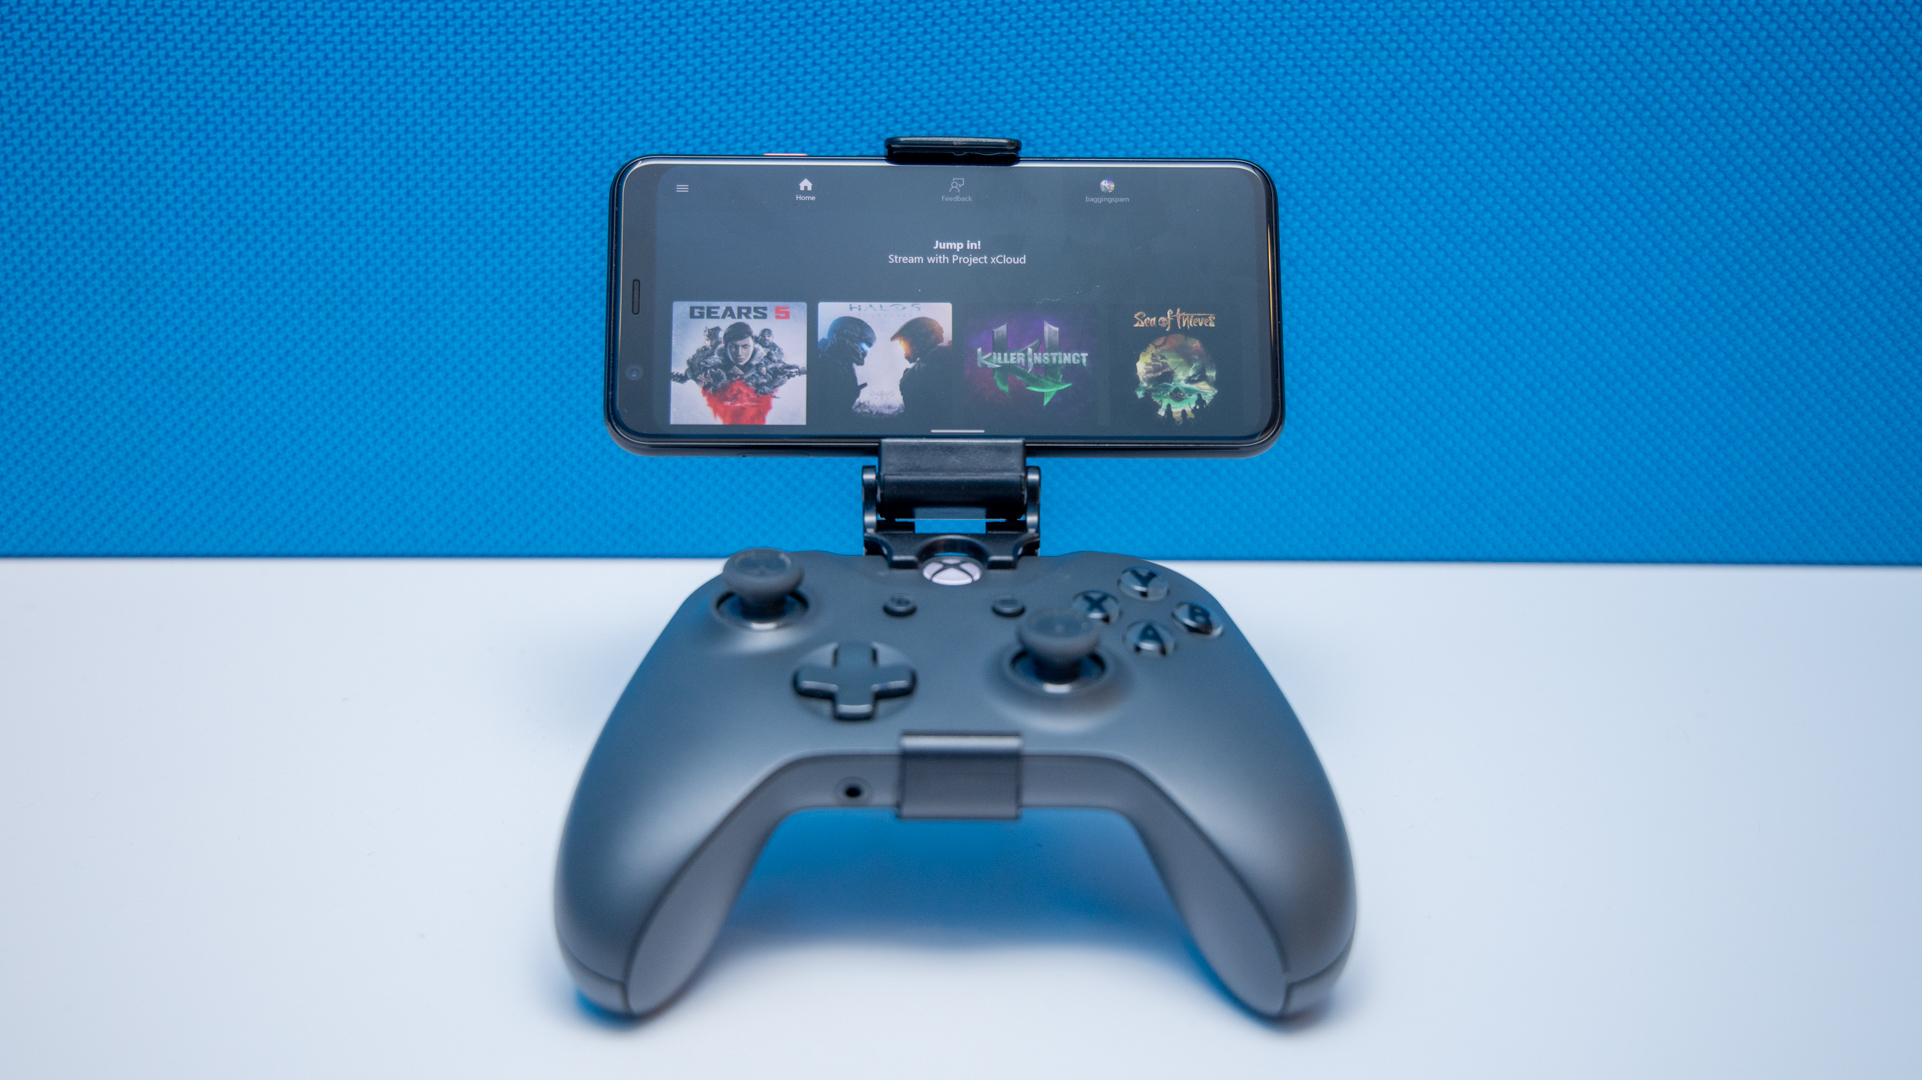 Microsoft and Samsung team up to offer Xbox-based mobile gaming service. Image via IGN.